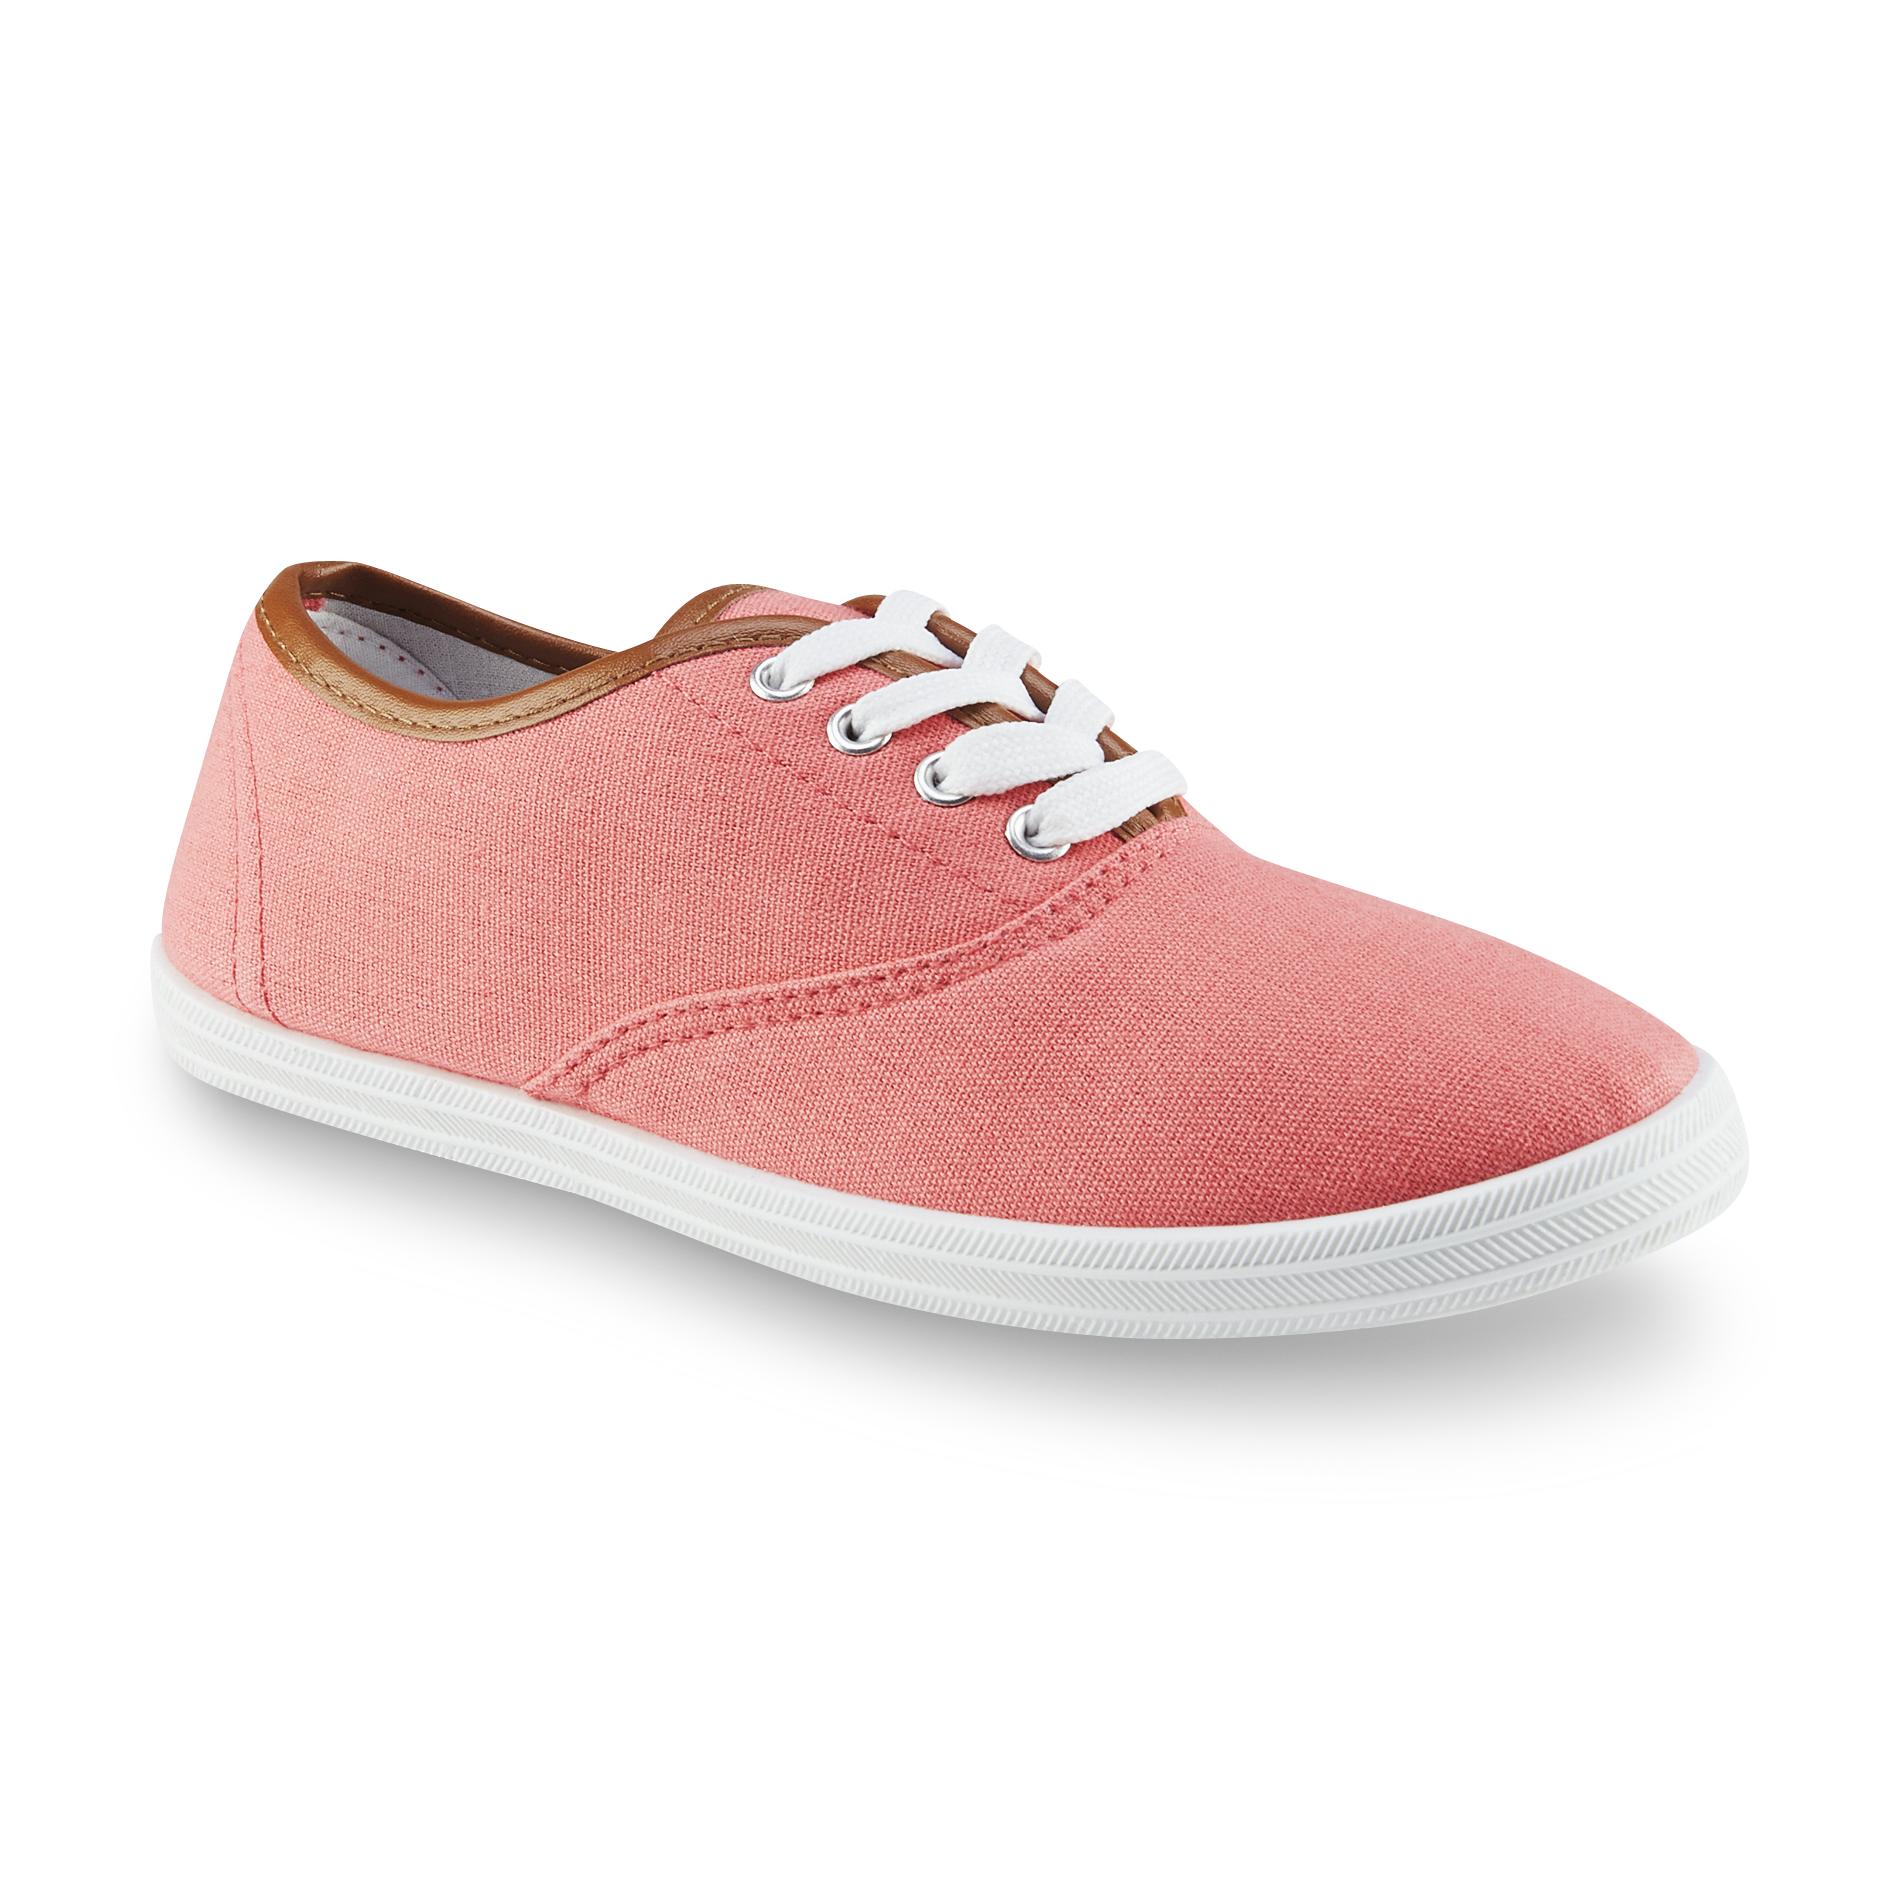 Twisted Women's Ticela Pink/White Plimsoll Shoe